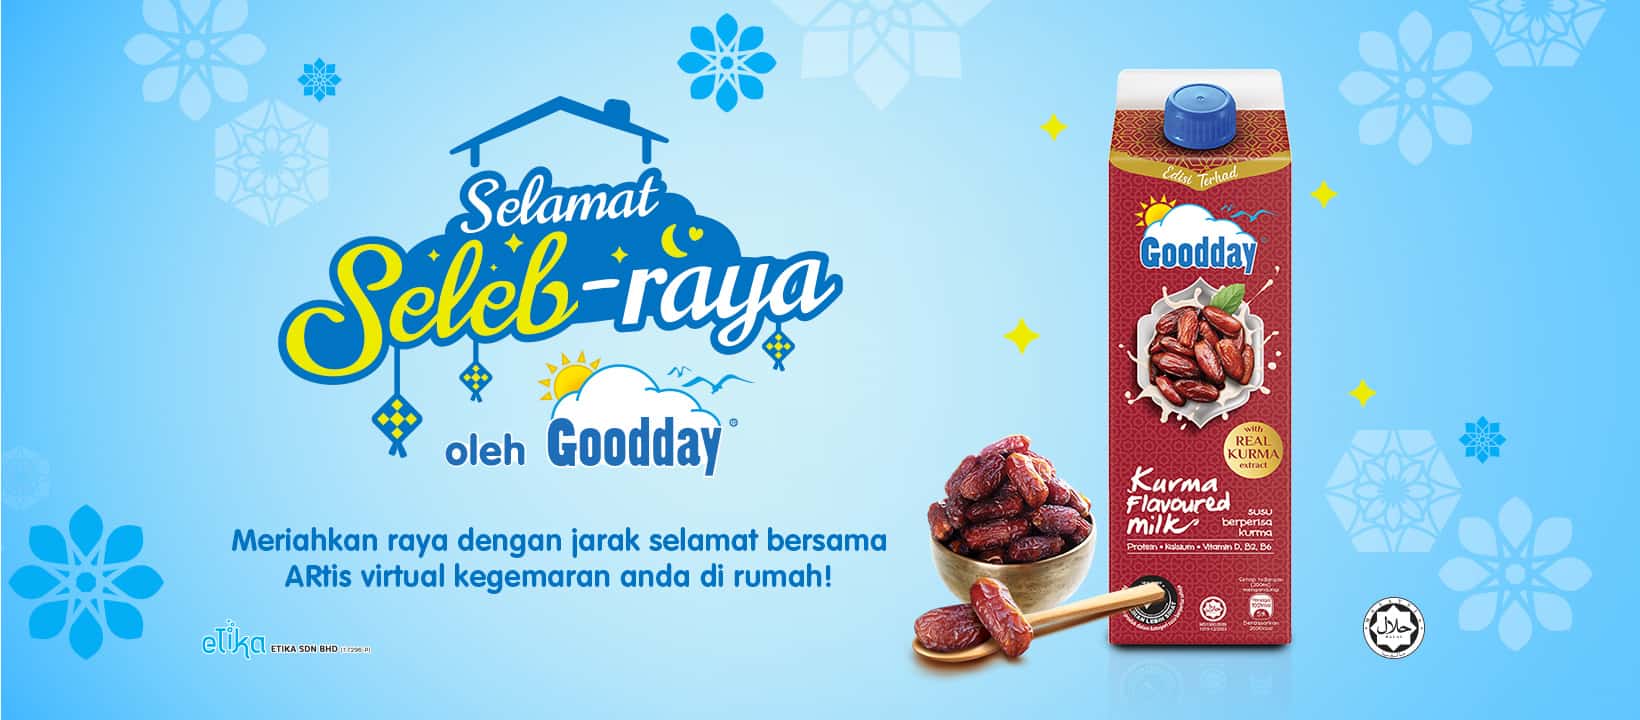 Goodday Milk leverages technology for goodness filled Raya celebrations